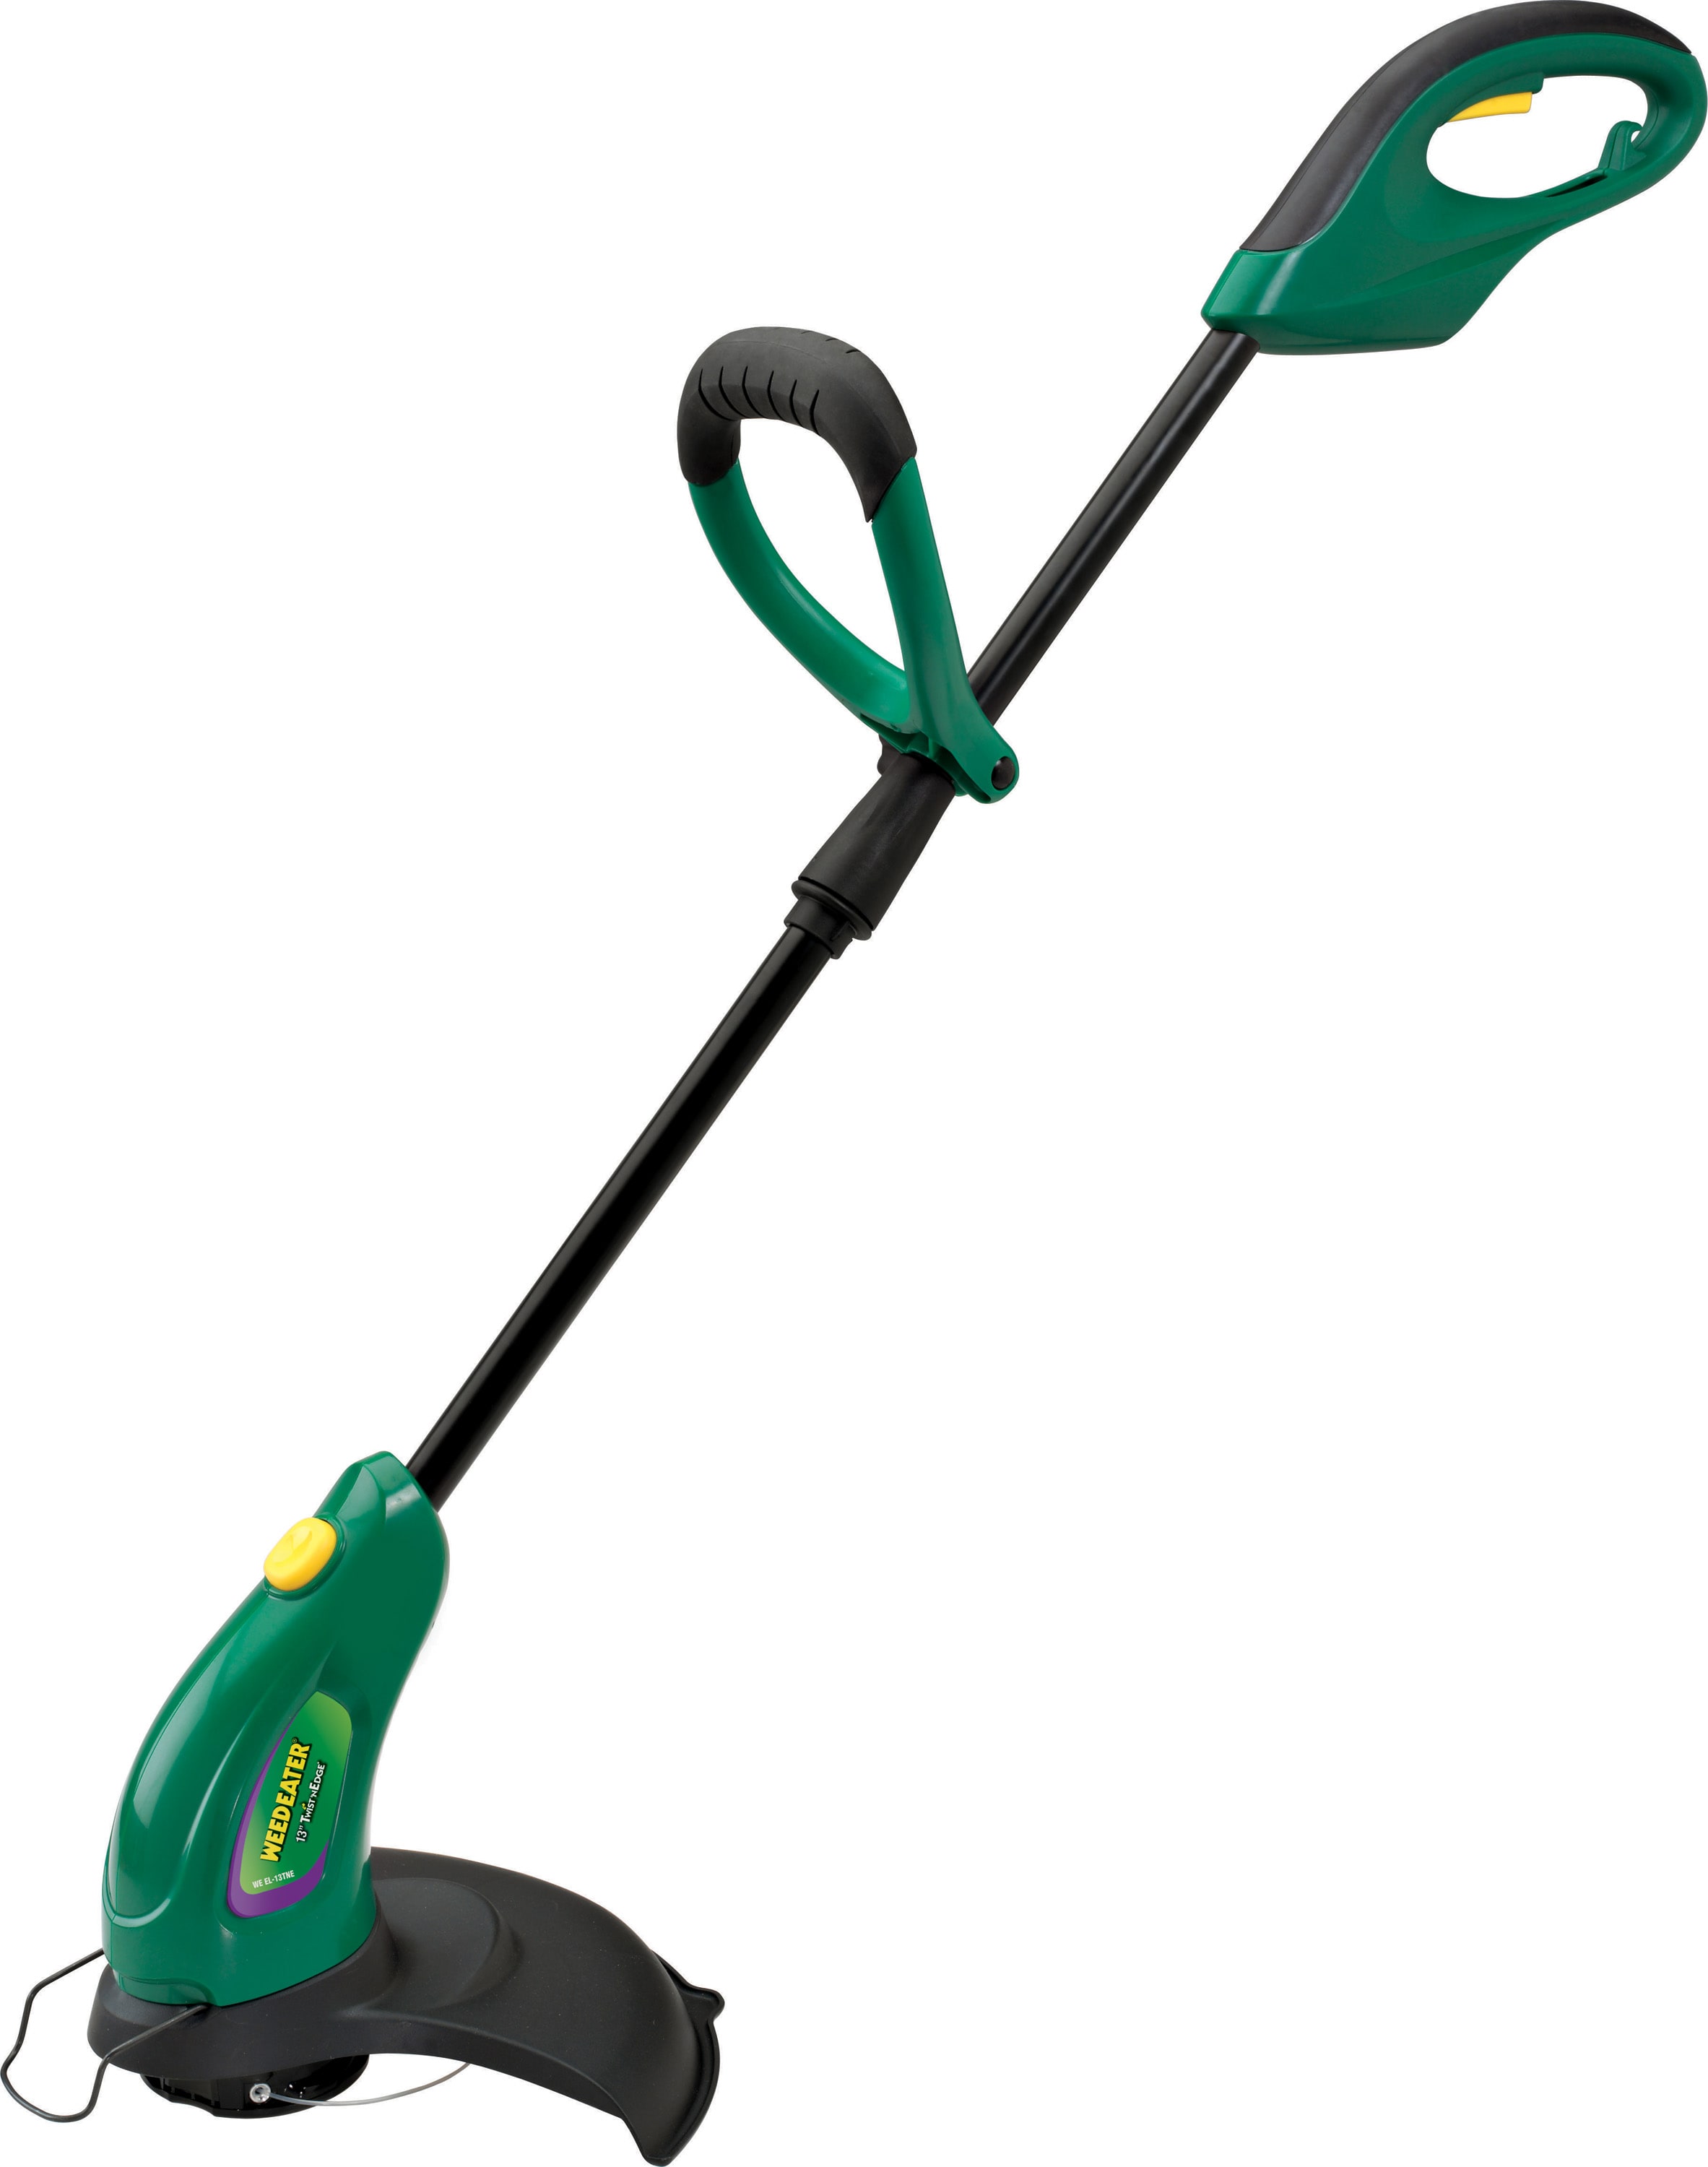 Weed Eater 4.3-Amp 13-in Electric Trimmer at Lowes.com